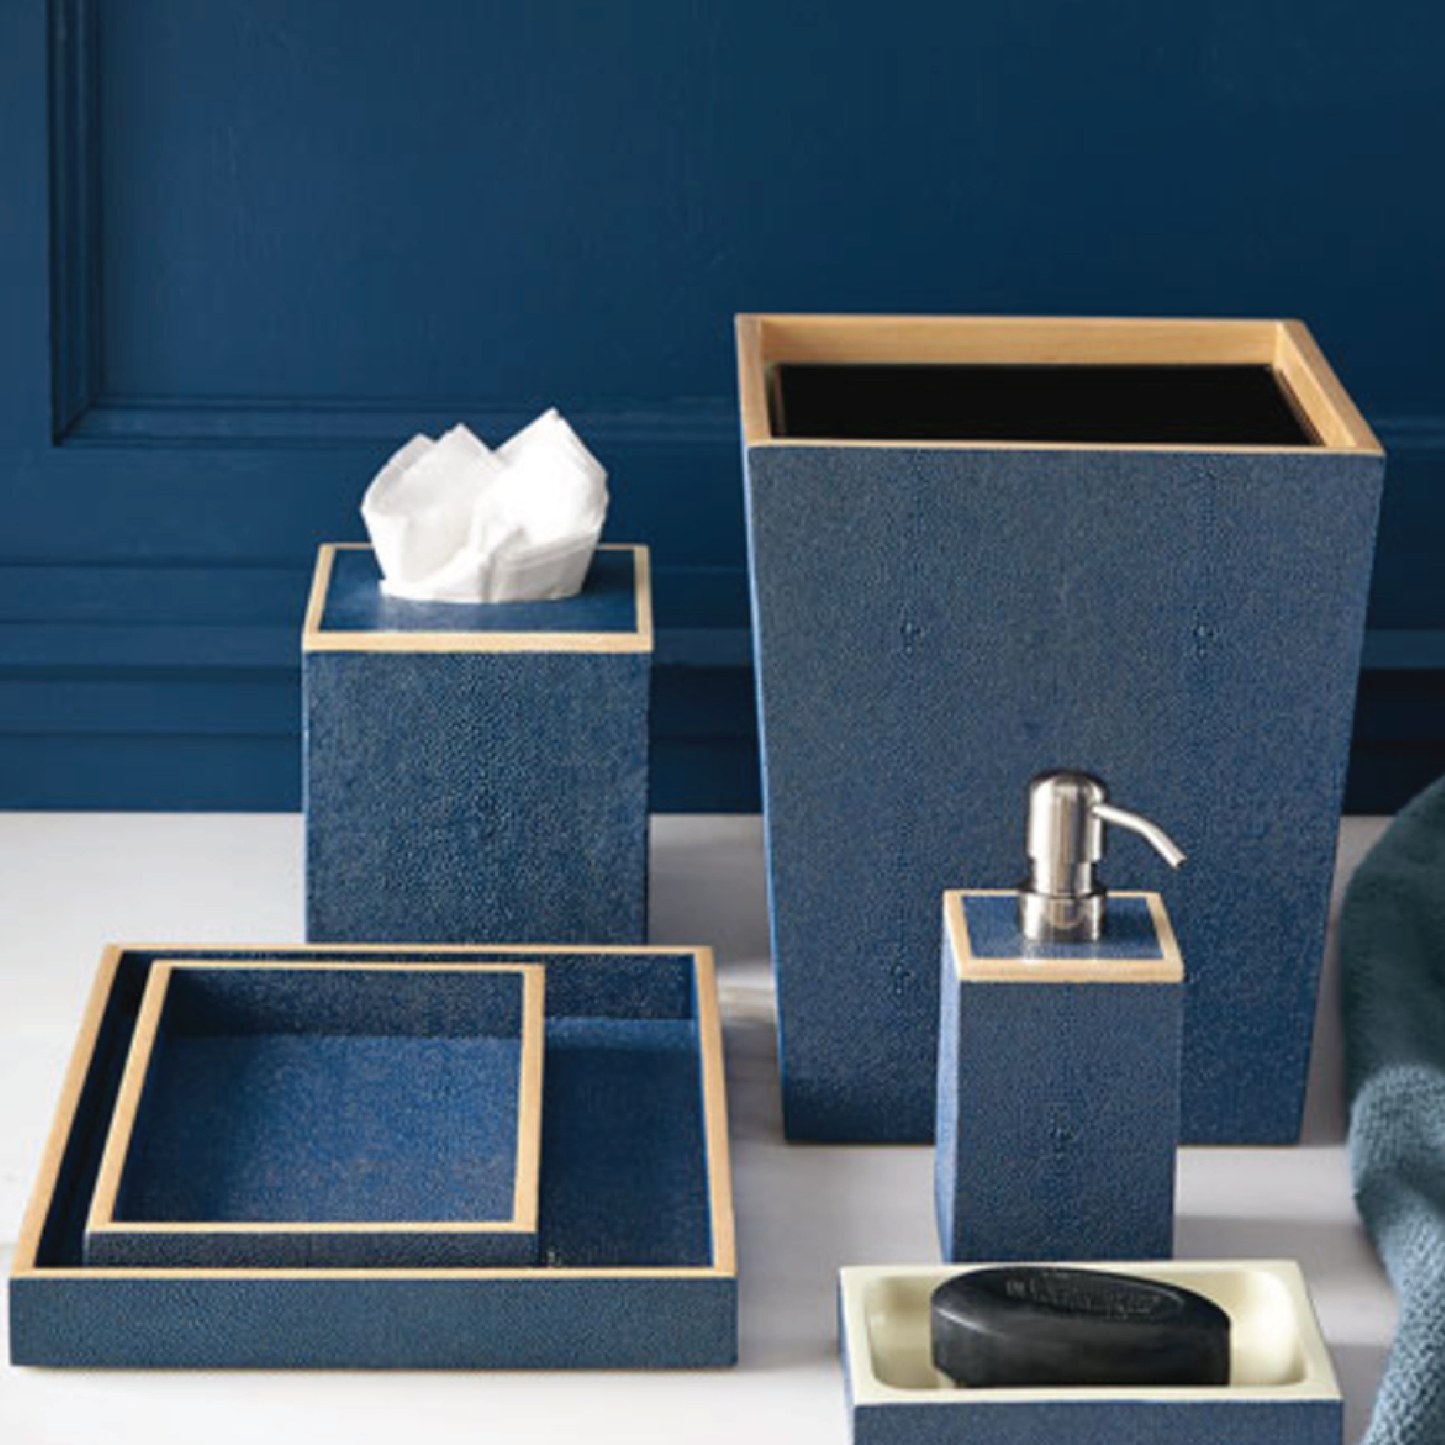 Pigeon and Poodle Bath Accessories - Realistic Faux Shagreen Leather